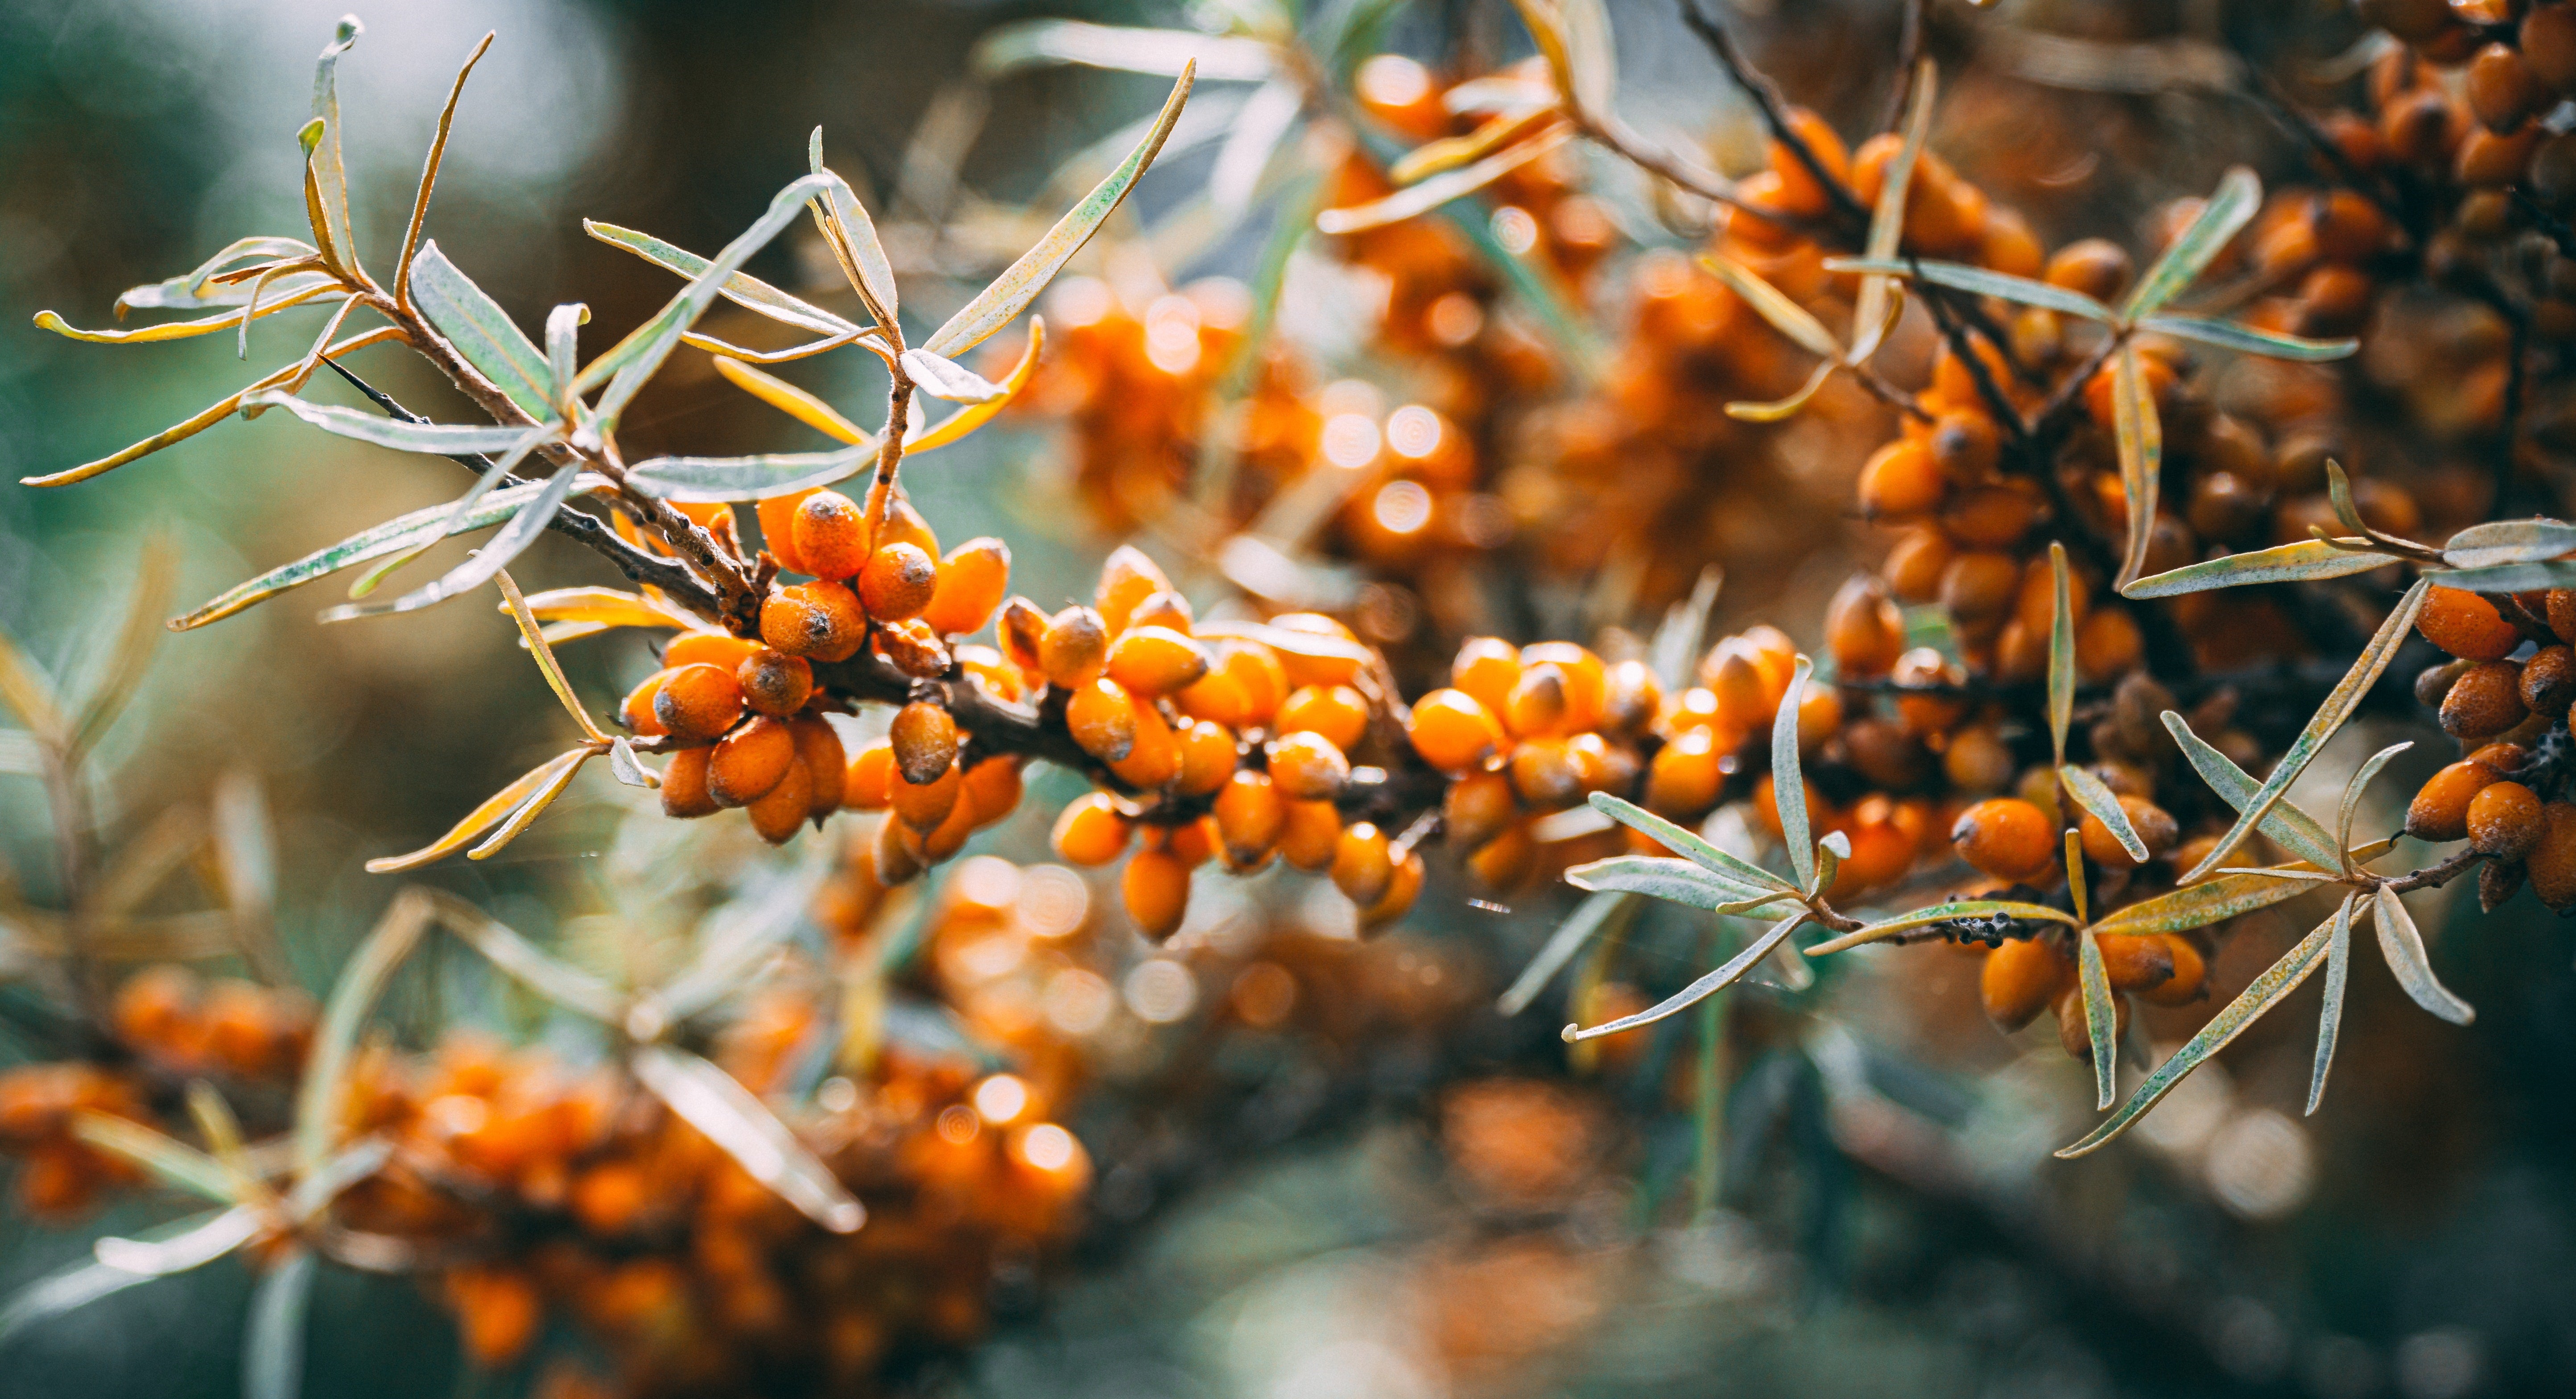 Sea Buckthorn Oil: Guide to Benefits, Uses, and Potential Side Effects